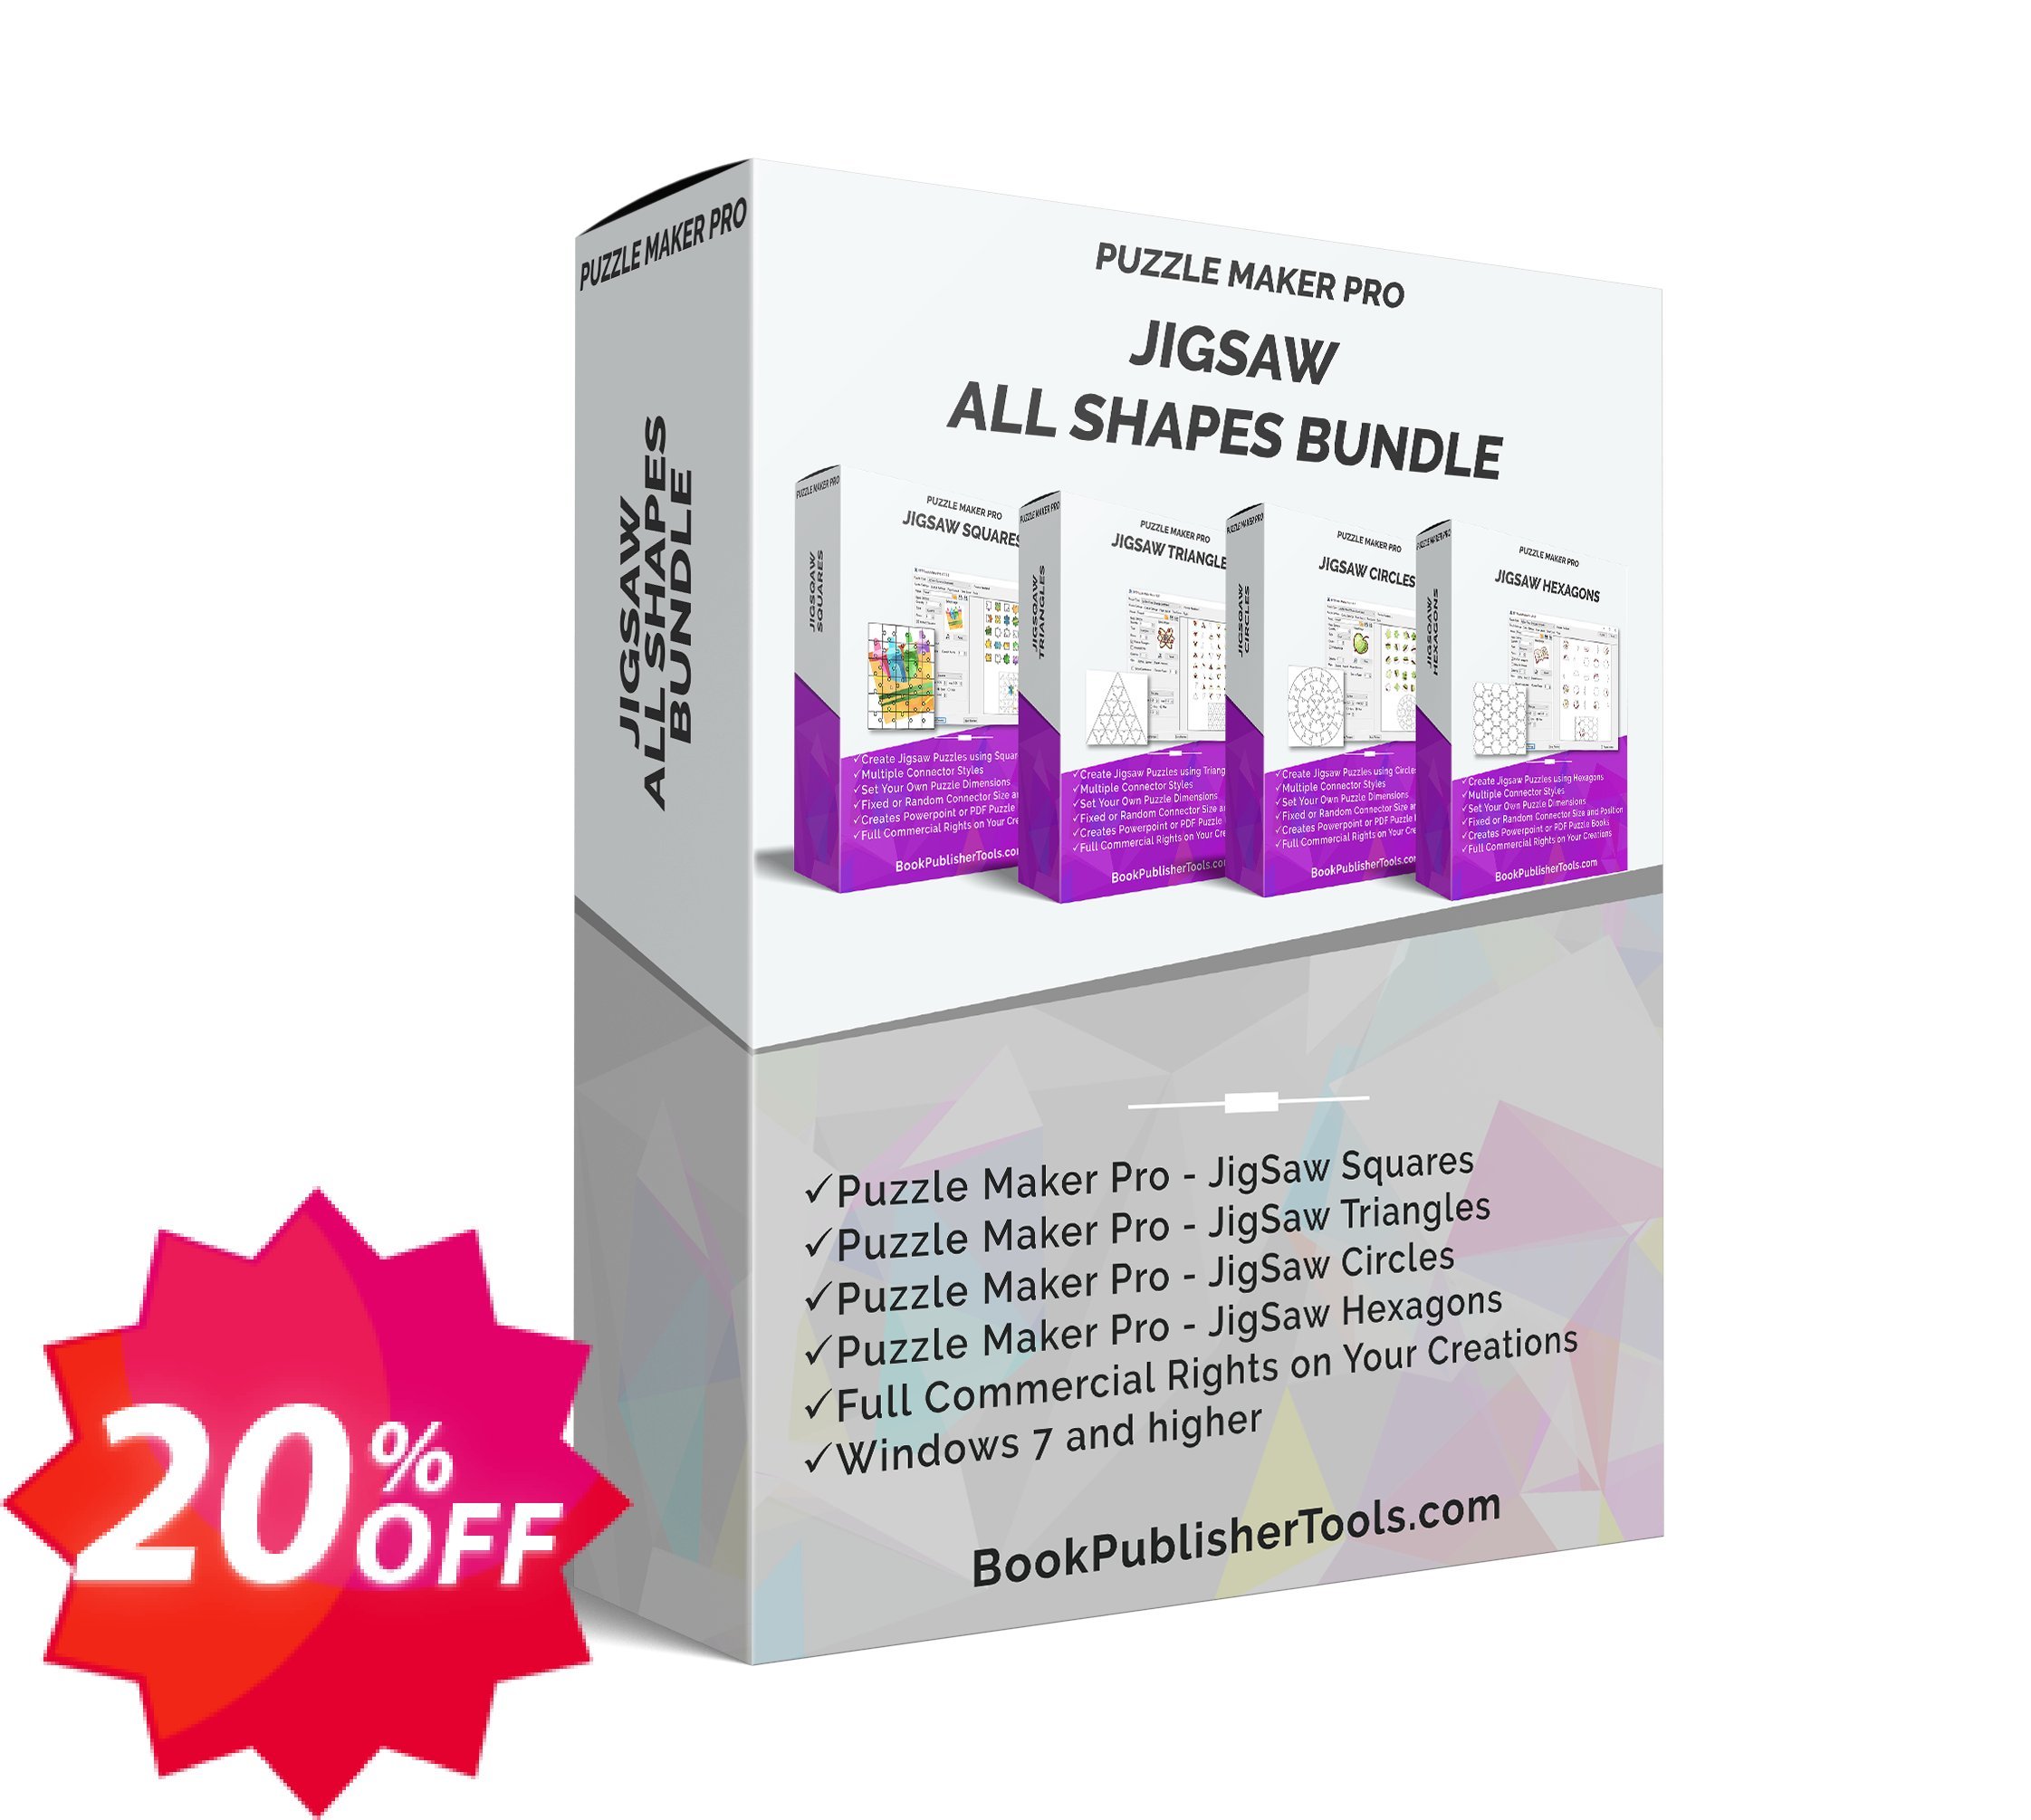 Puzzle Maker Pro - JigSaw All Shapes Bundle Coupon code 20% discount 